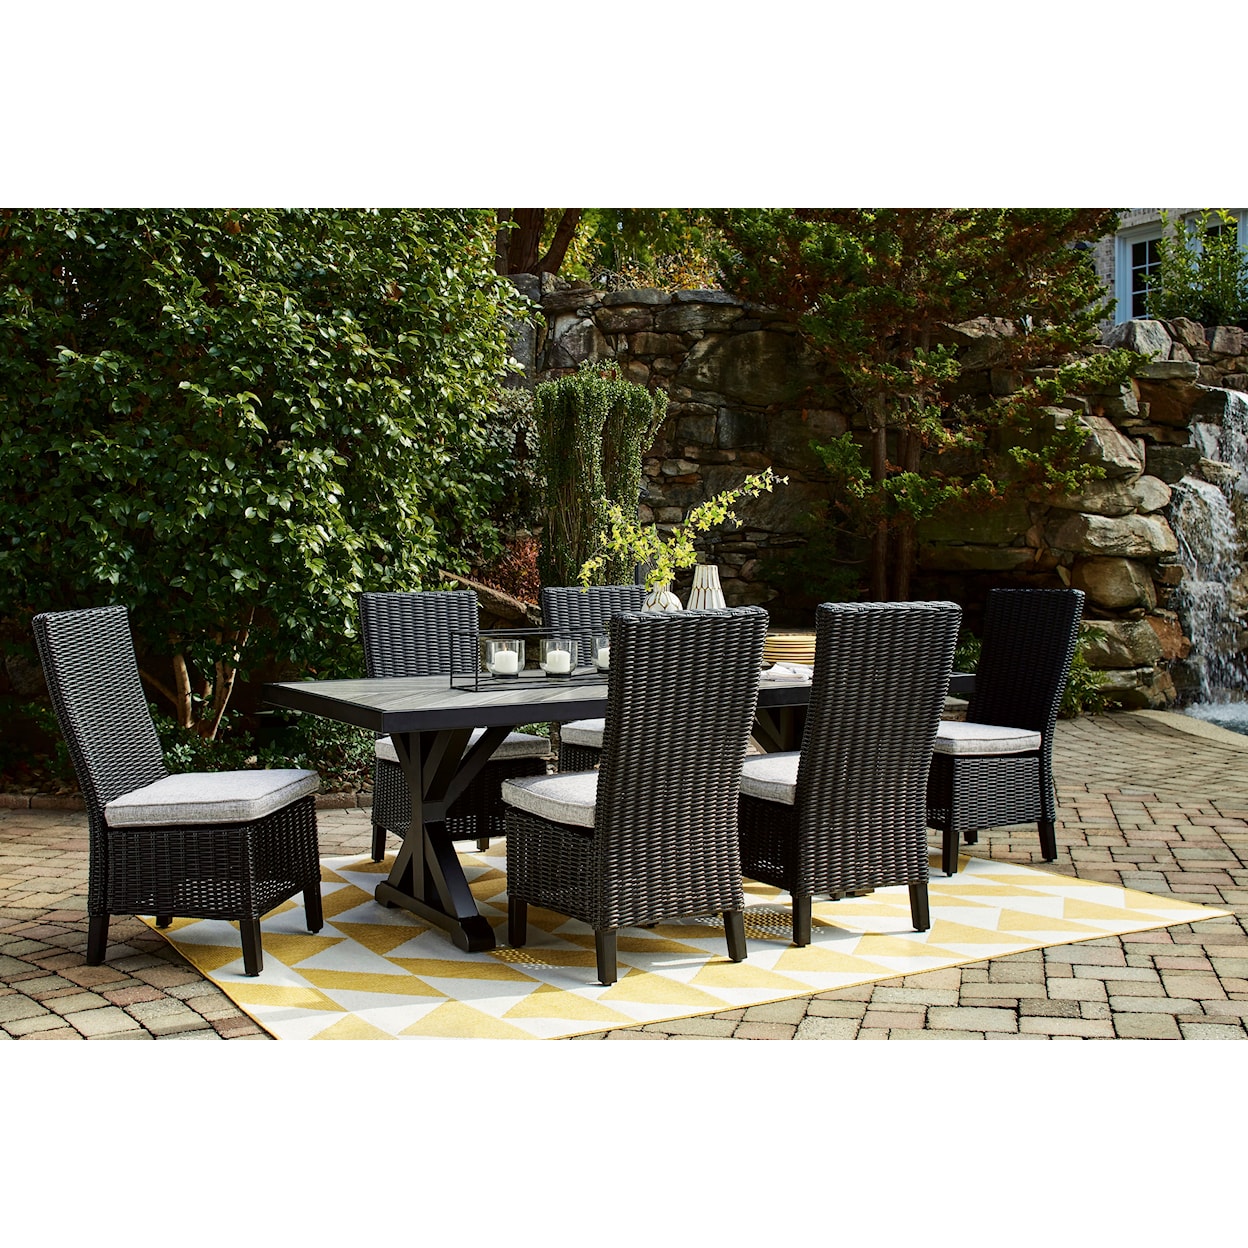 Signature Beachcroft Outdoor Dining Table with 6 Chairs